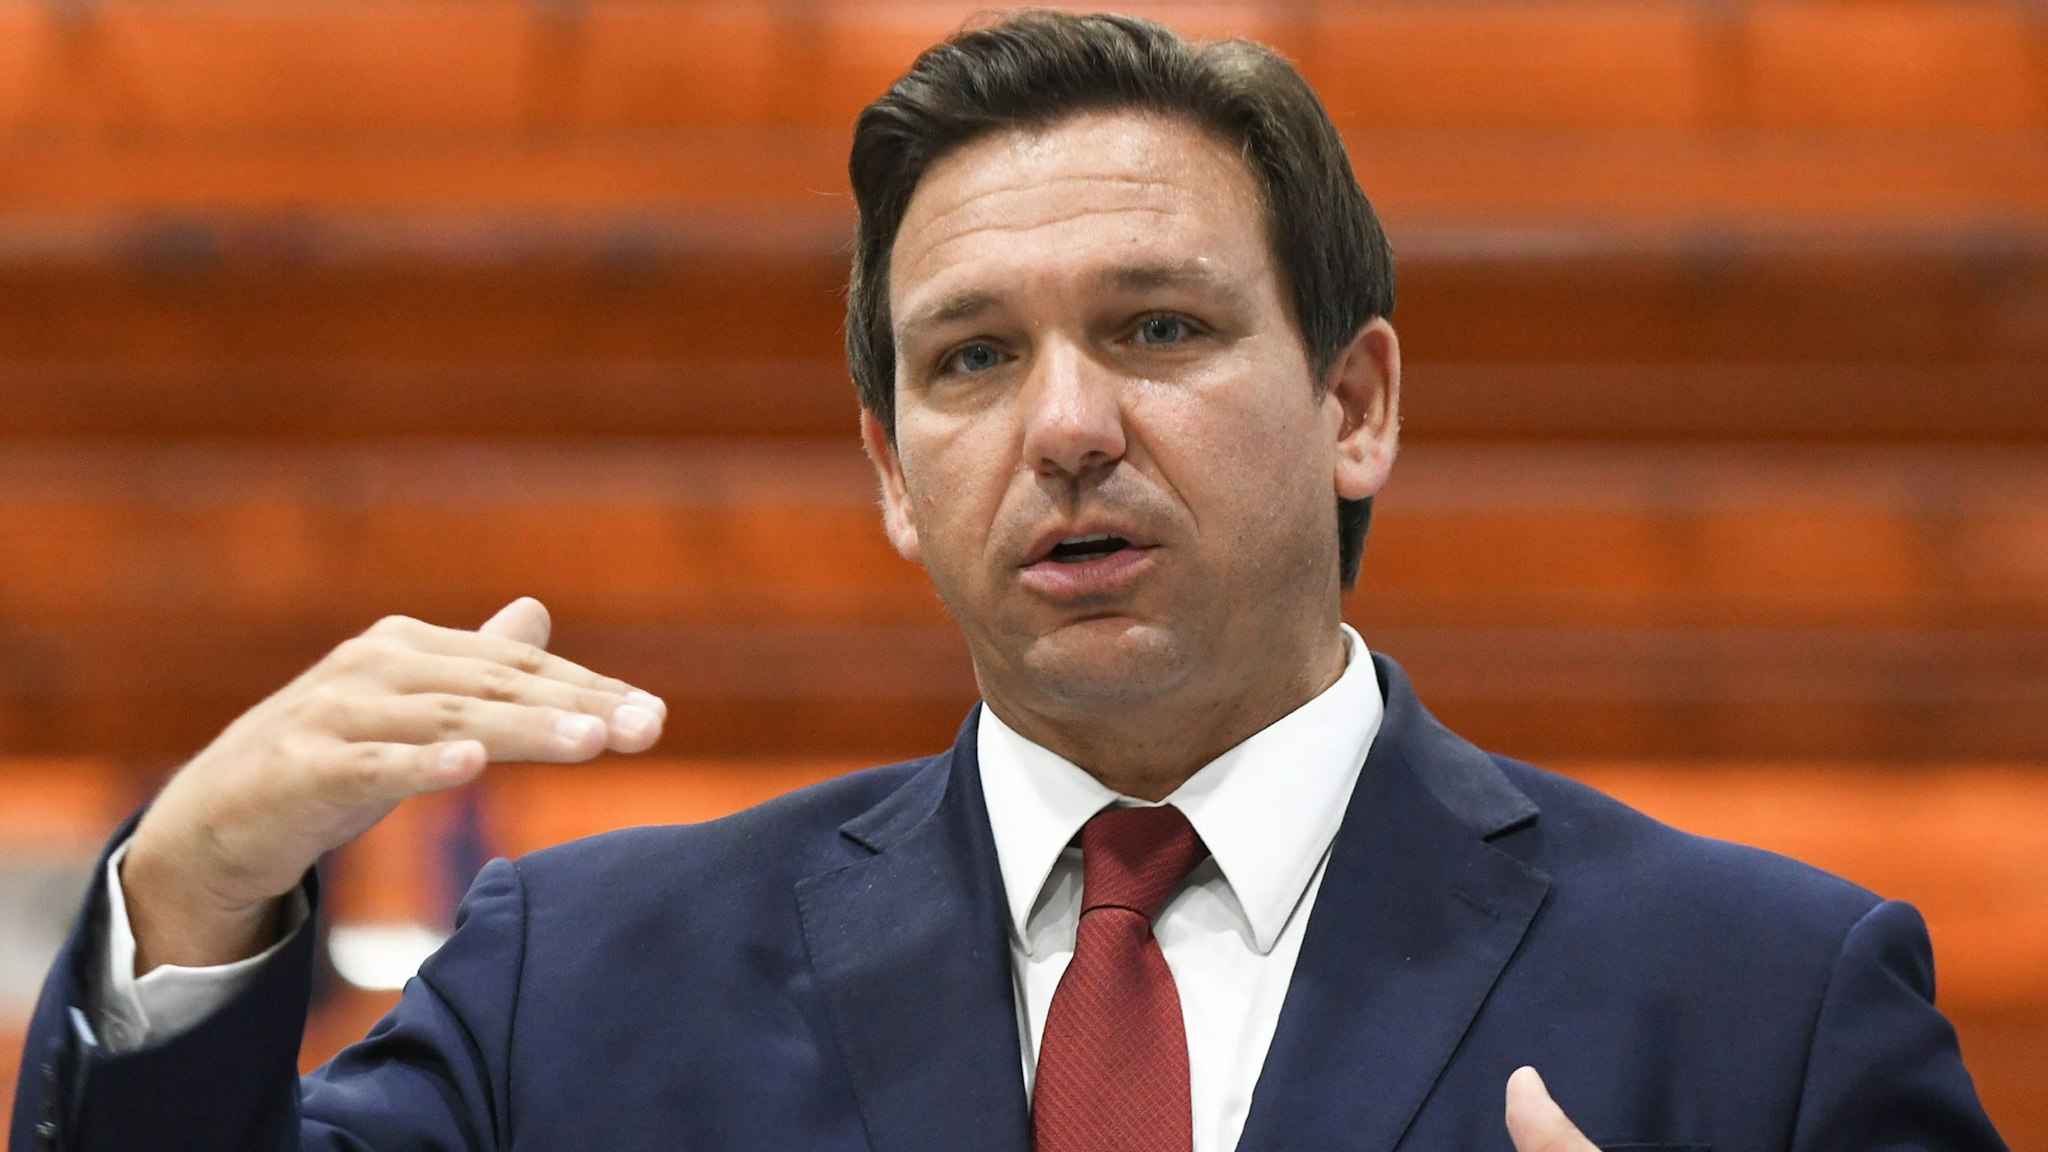 LAKELAND, FLORIDA, UNITED STATES - 2021/05/28: Florida Gov. Ron DeSantis speaks at a press conference at LifeScience Logistics to urge the Biden administration to approve Florida's plan to import prescription drugs from Canada, thereby saving Floridians an estimated $100 million annually on drug costs.